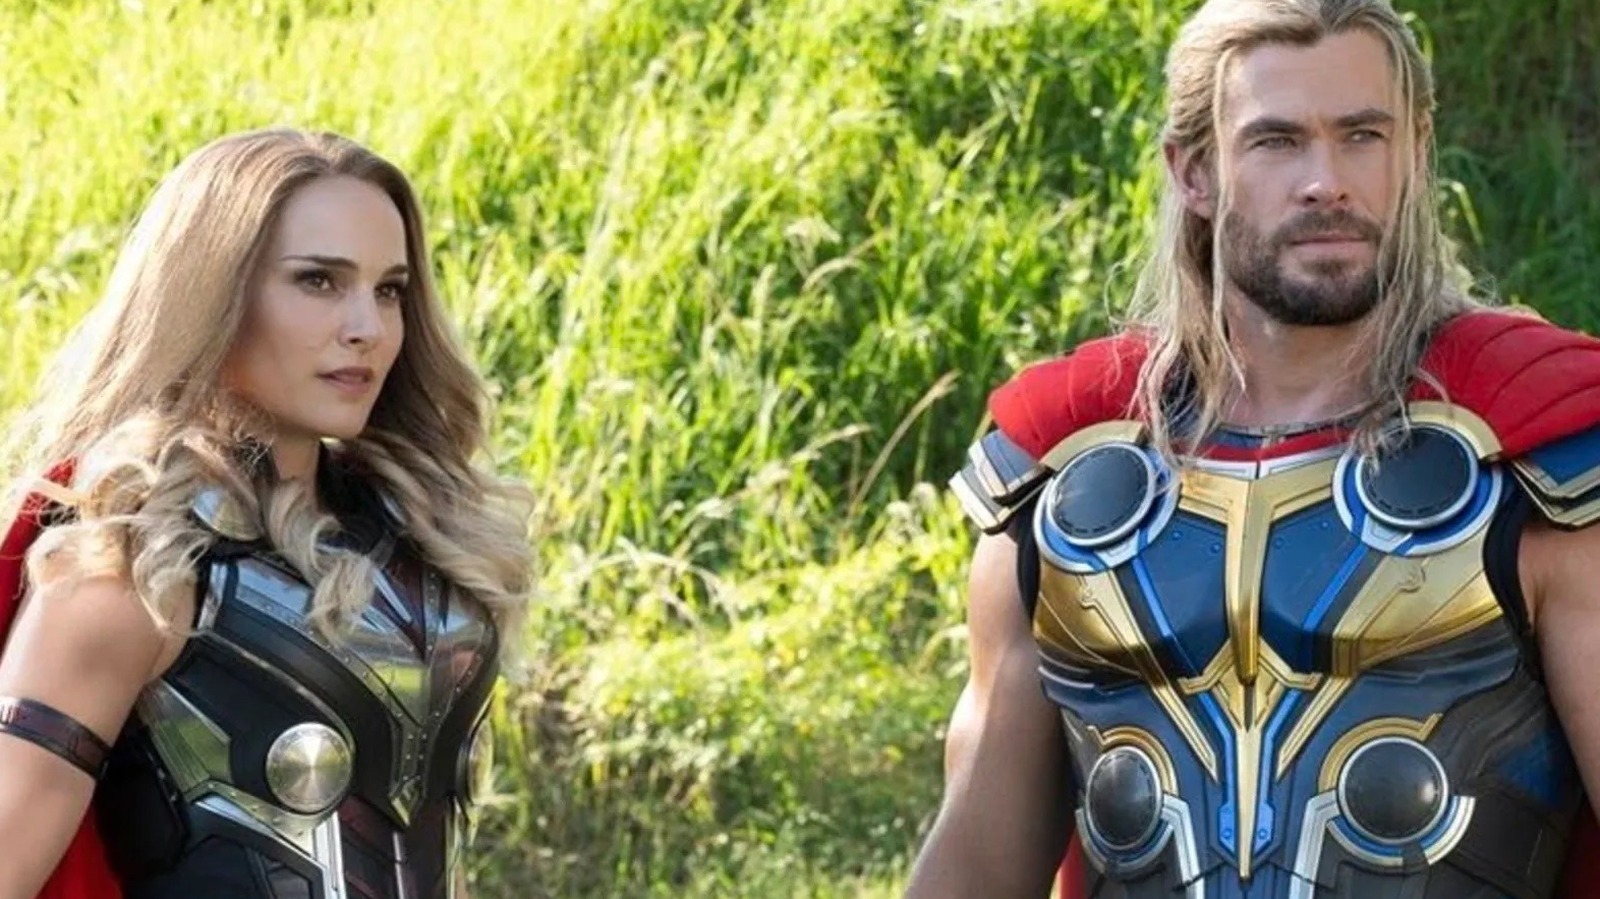 Thor 4: Love and Thunder' Details and Cast Information